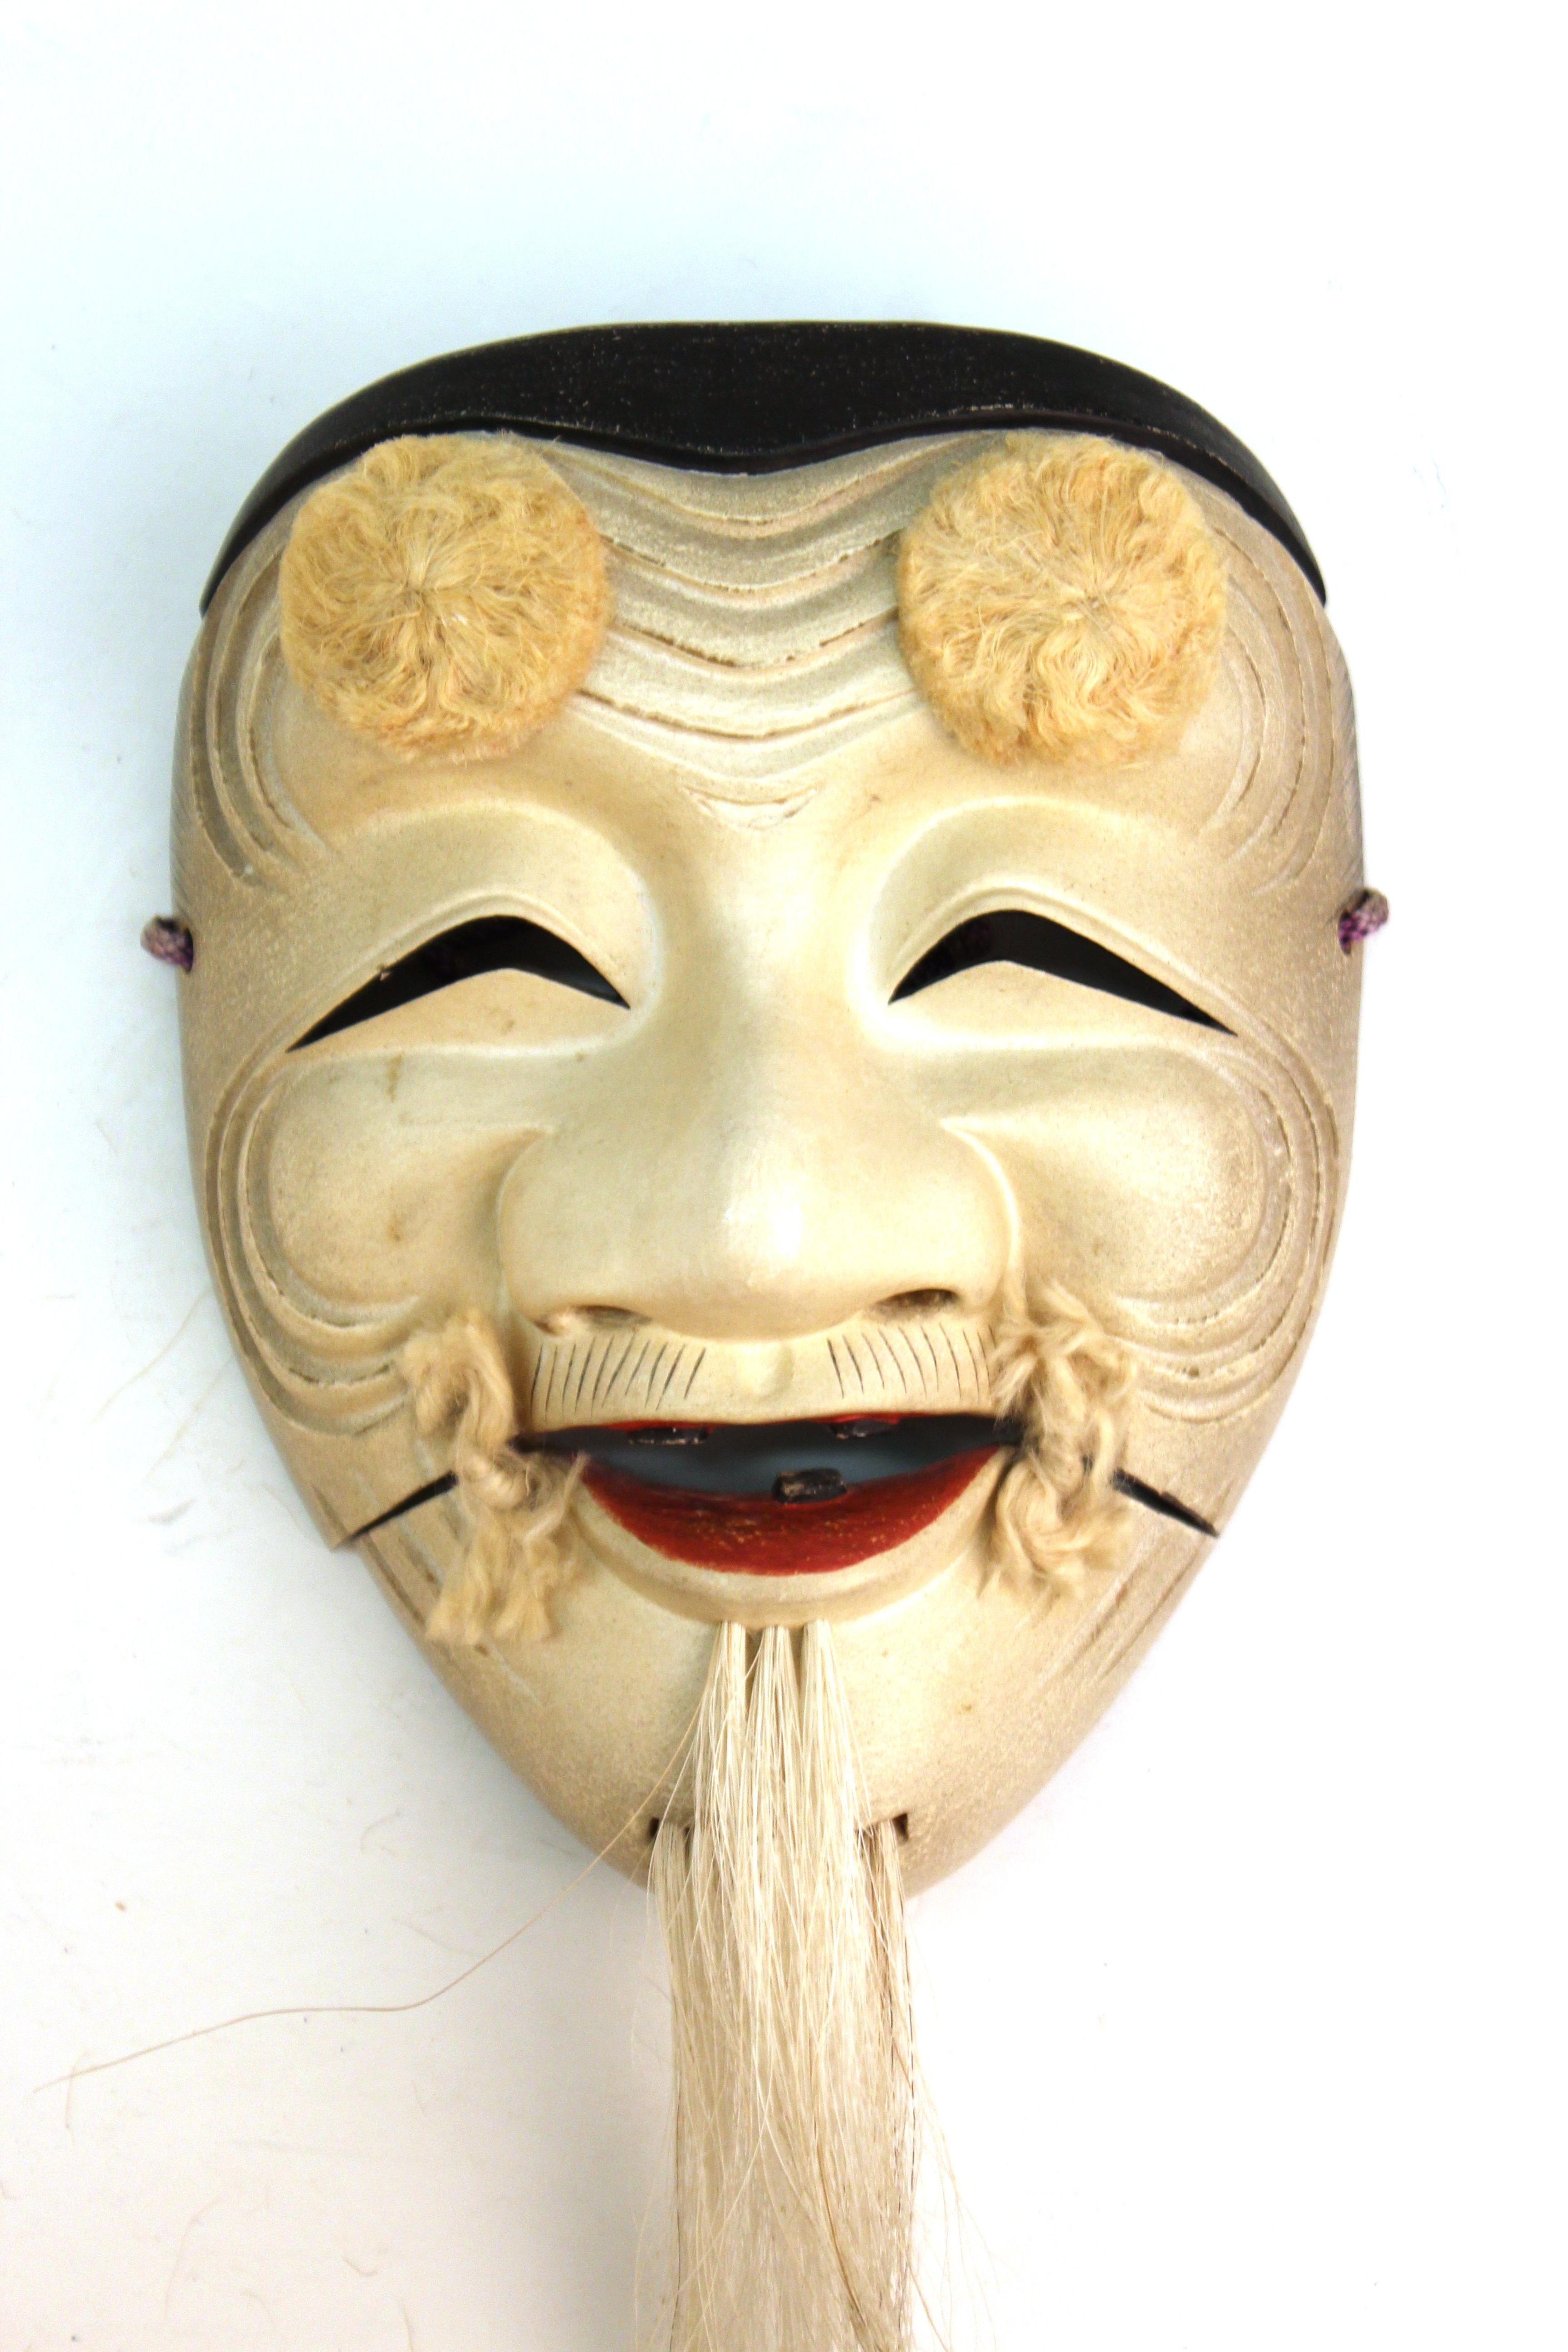 Japanese Meiji period lacquered carved paloma wood Noh mask depicting Okina, the happy old man of wisdom and joy who is a distinguished character in many Noh dramas. This mask was carved circa 1890-1900 by Ko-Ikiu, from a long line of Noh mask